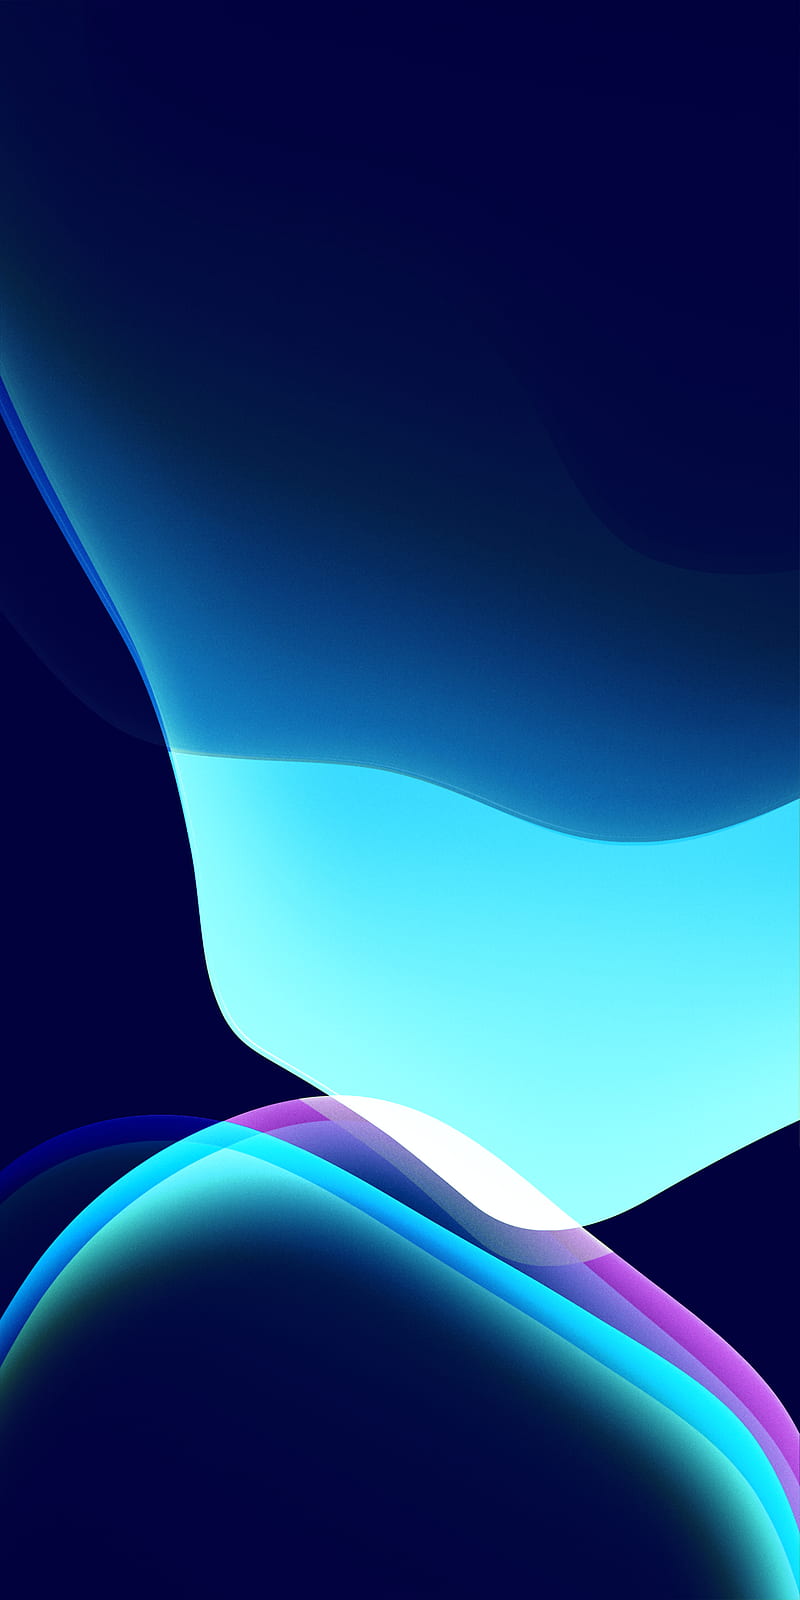 100+] Cute Blue Iphone Wallpapers | Wallpapers.com